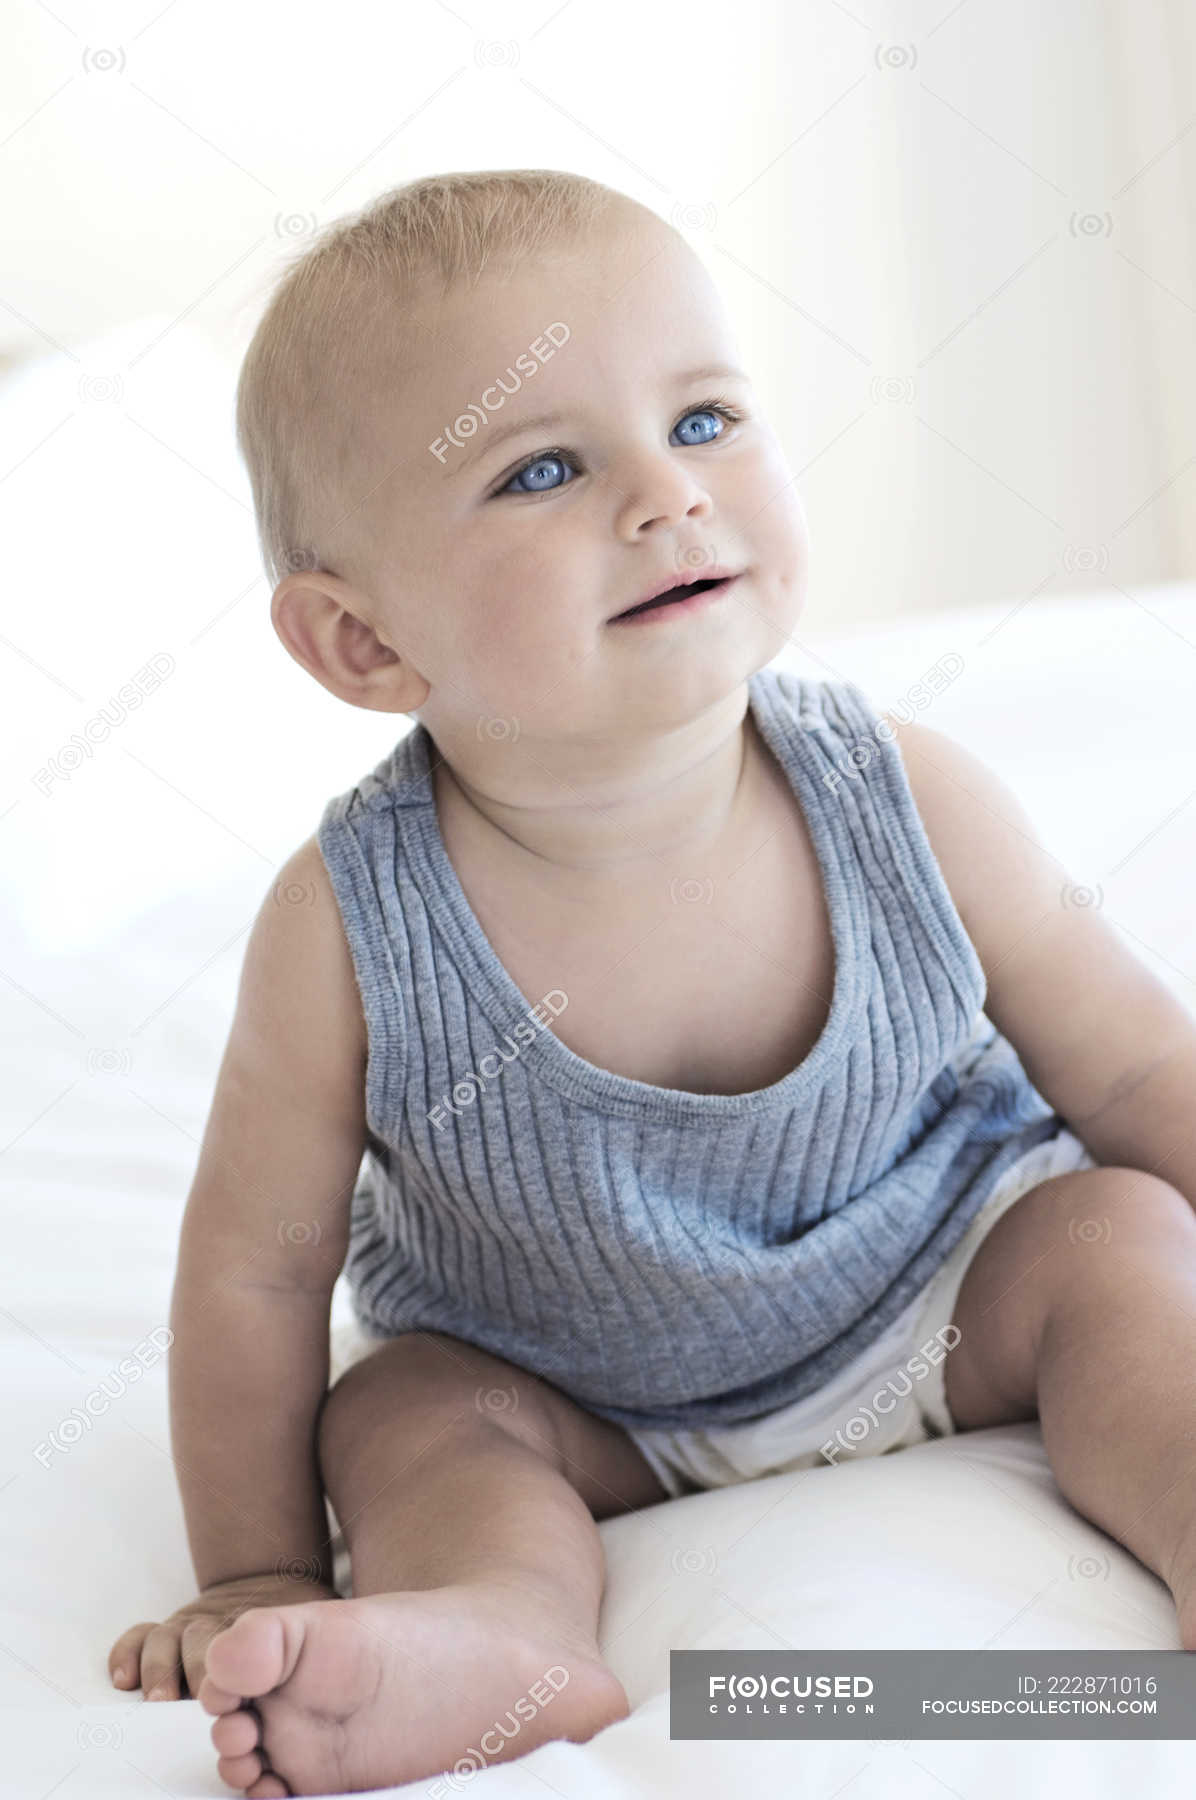 Cute Baby Boy With Blue Eyes Sitting On Bed Human Face Looking